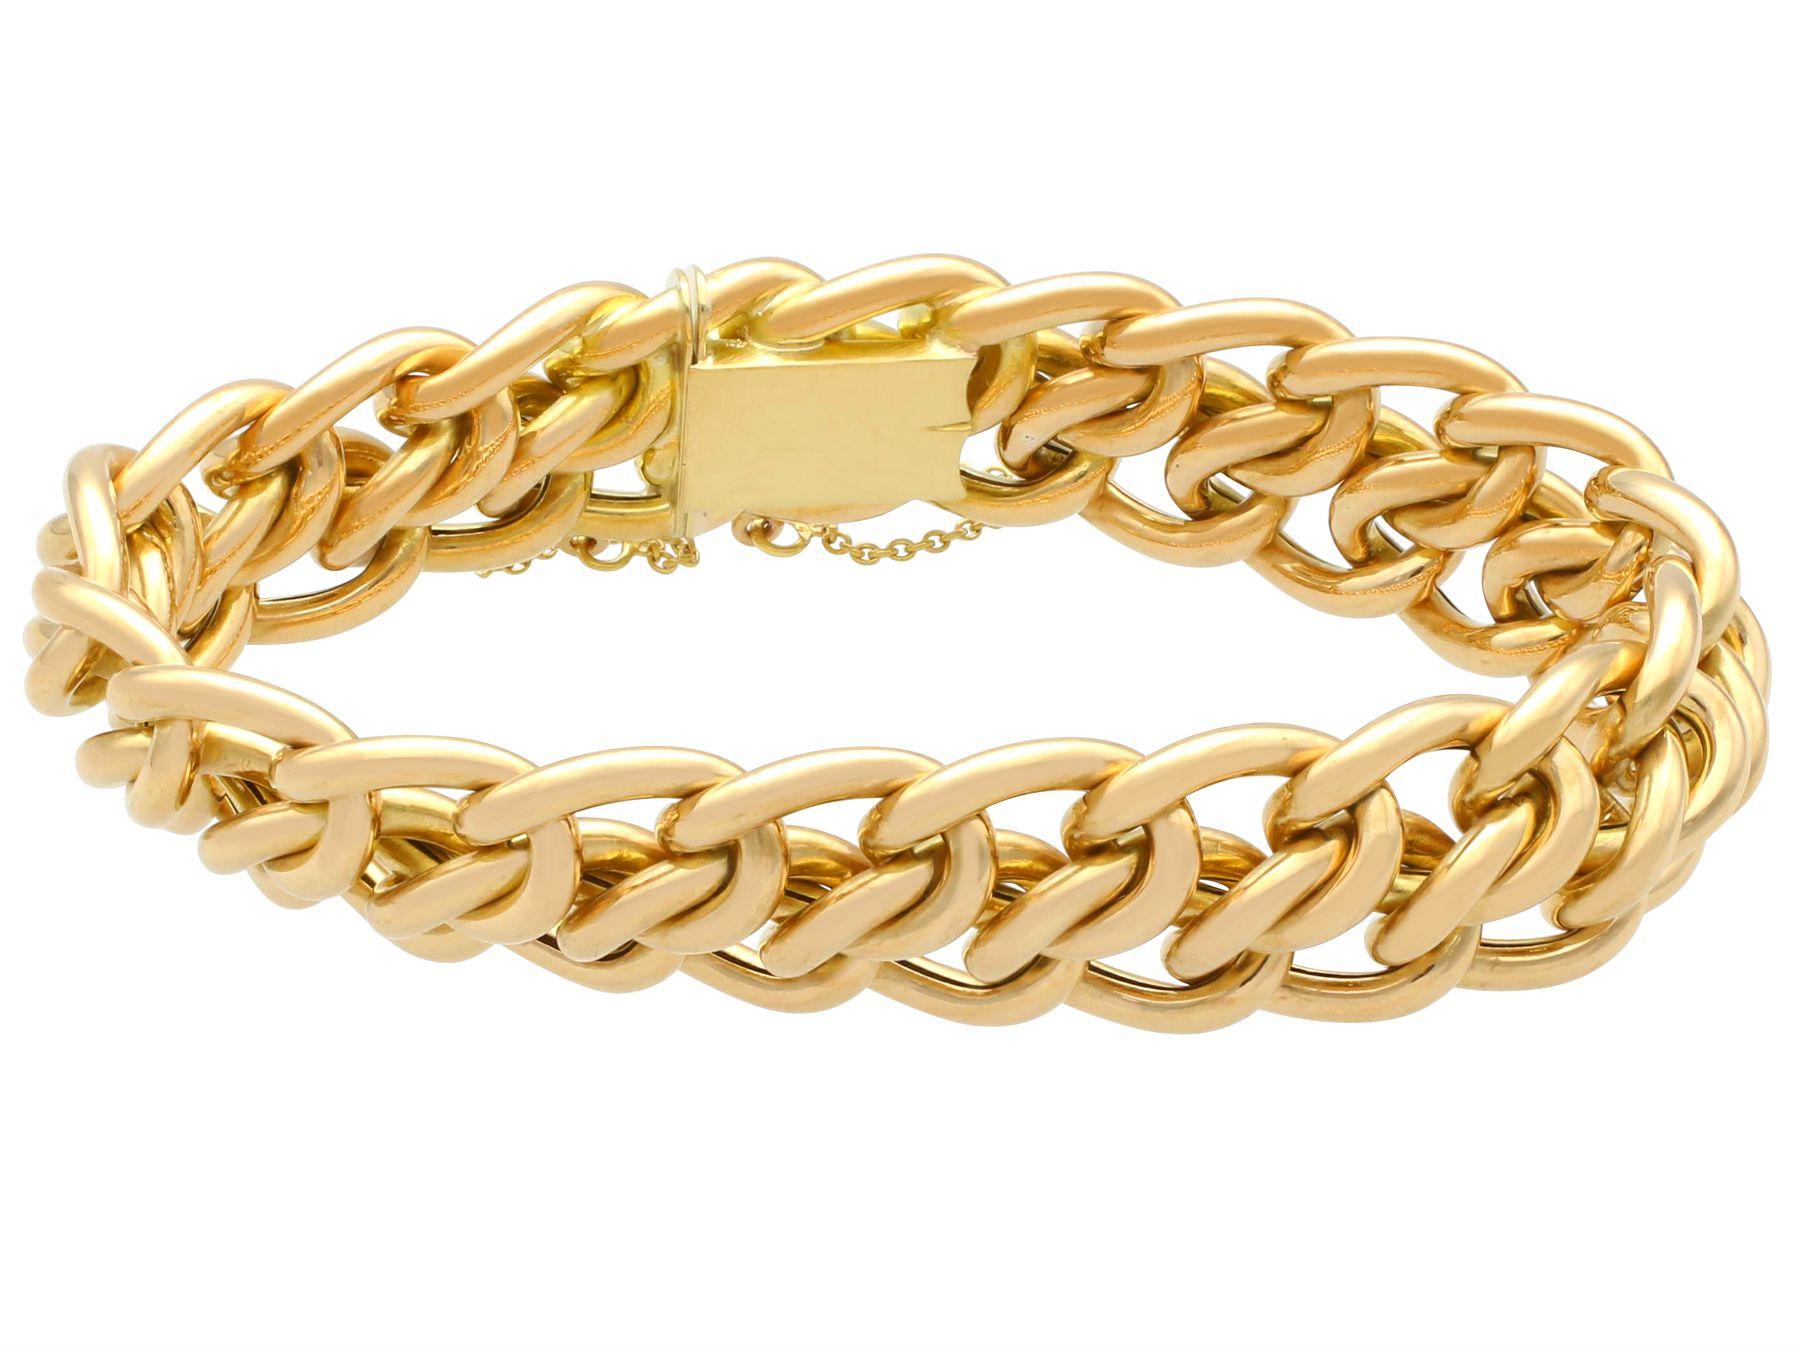 Antique French Yellow Gold Bracelet, circa 1910 In Excellent Condition For Sale In Jesmond, Newcastle Upon Tyne